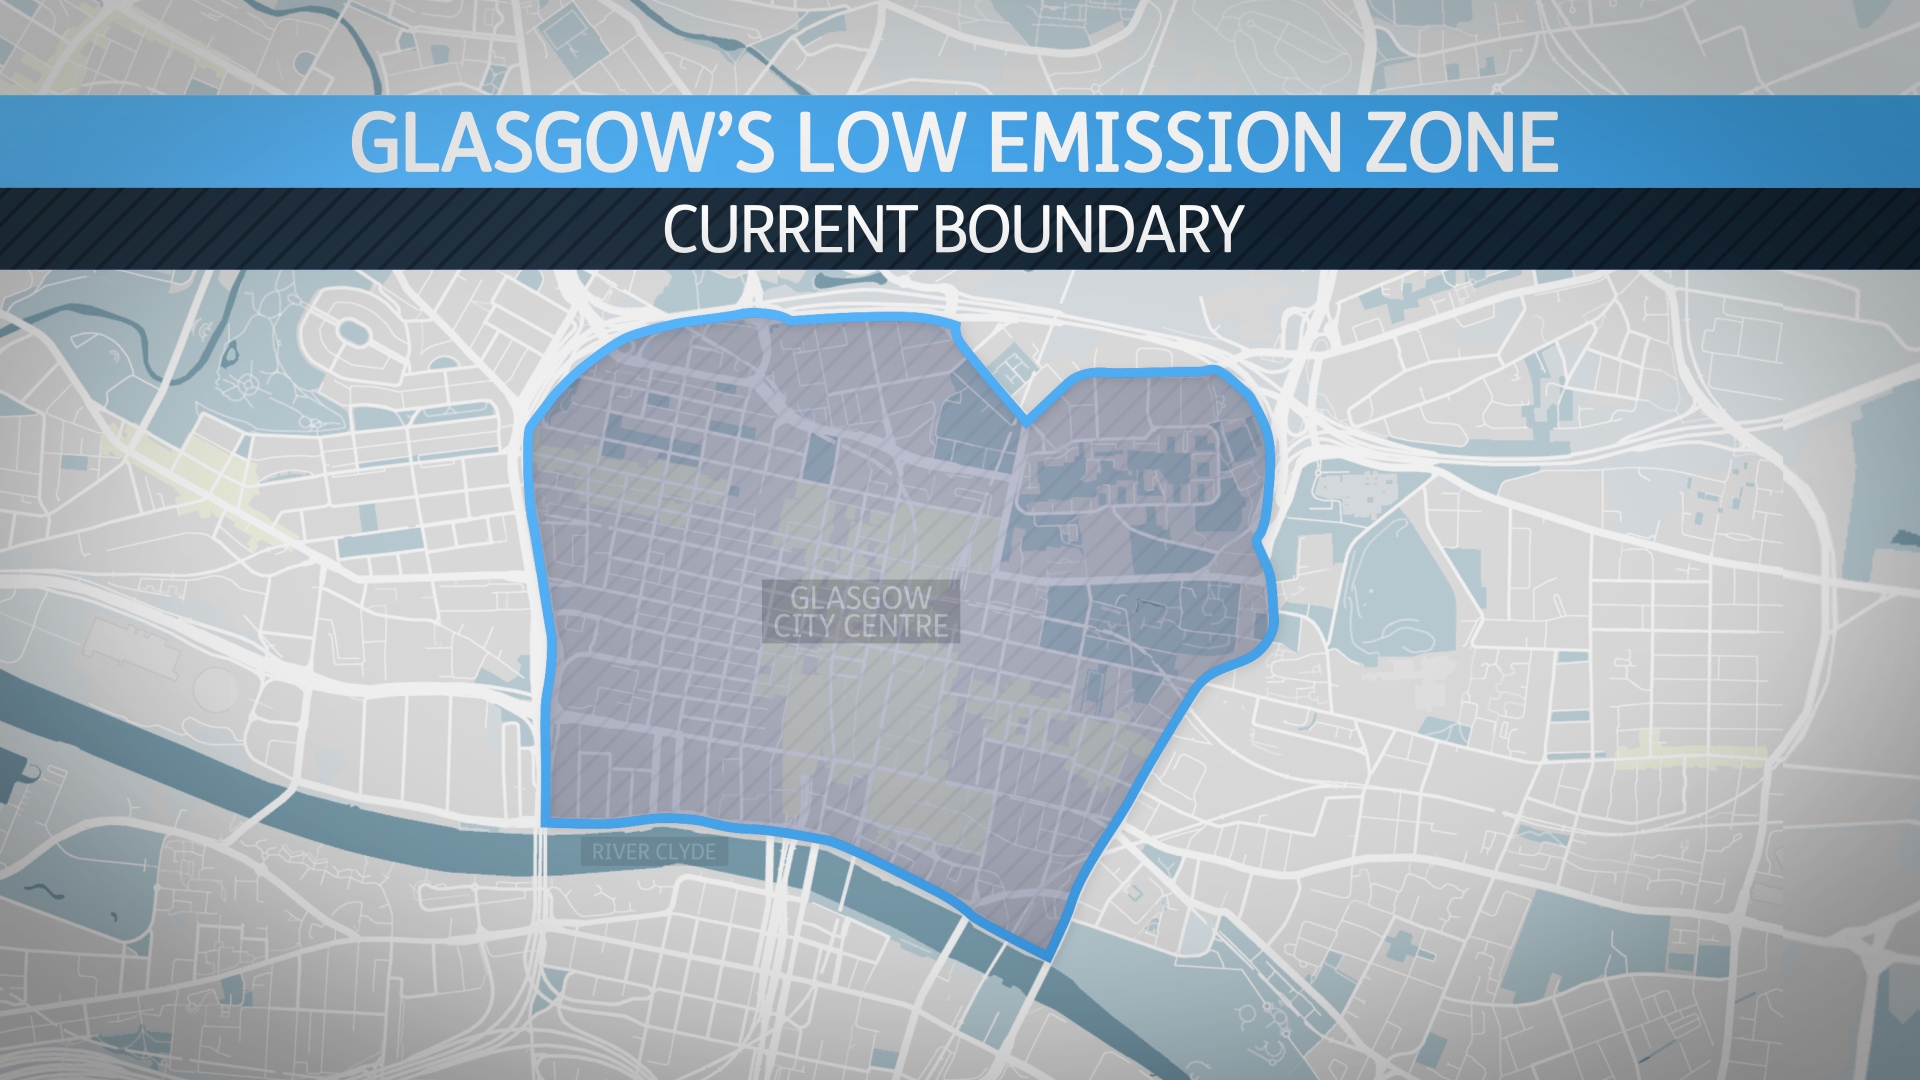 The Low Emission Zone covers almost the entirety of Glasgow's city centre.